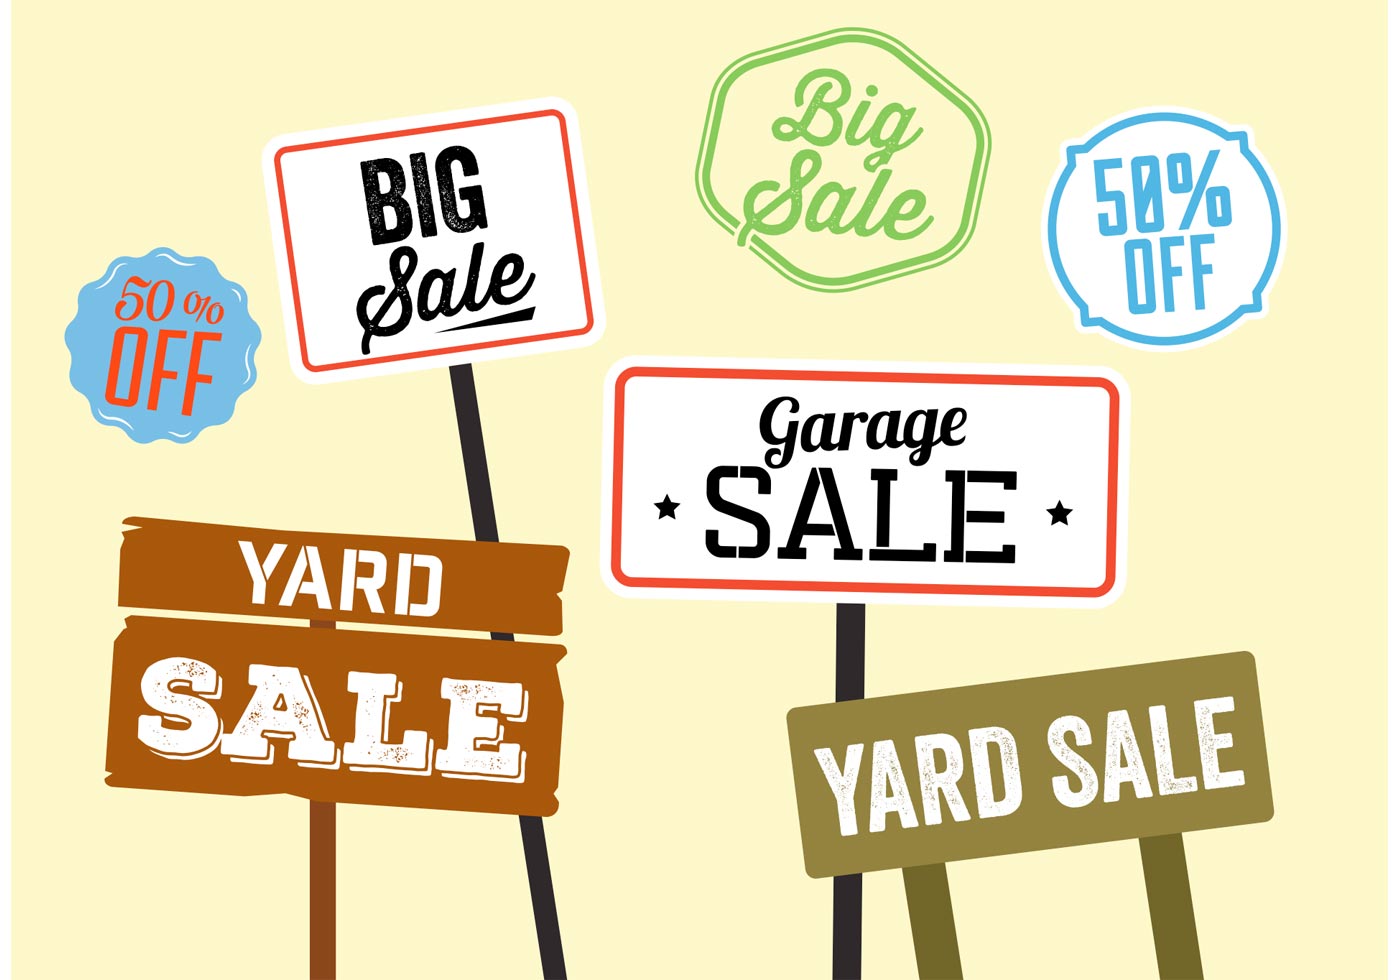 Download Yard Sale Sign Vectors for free.